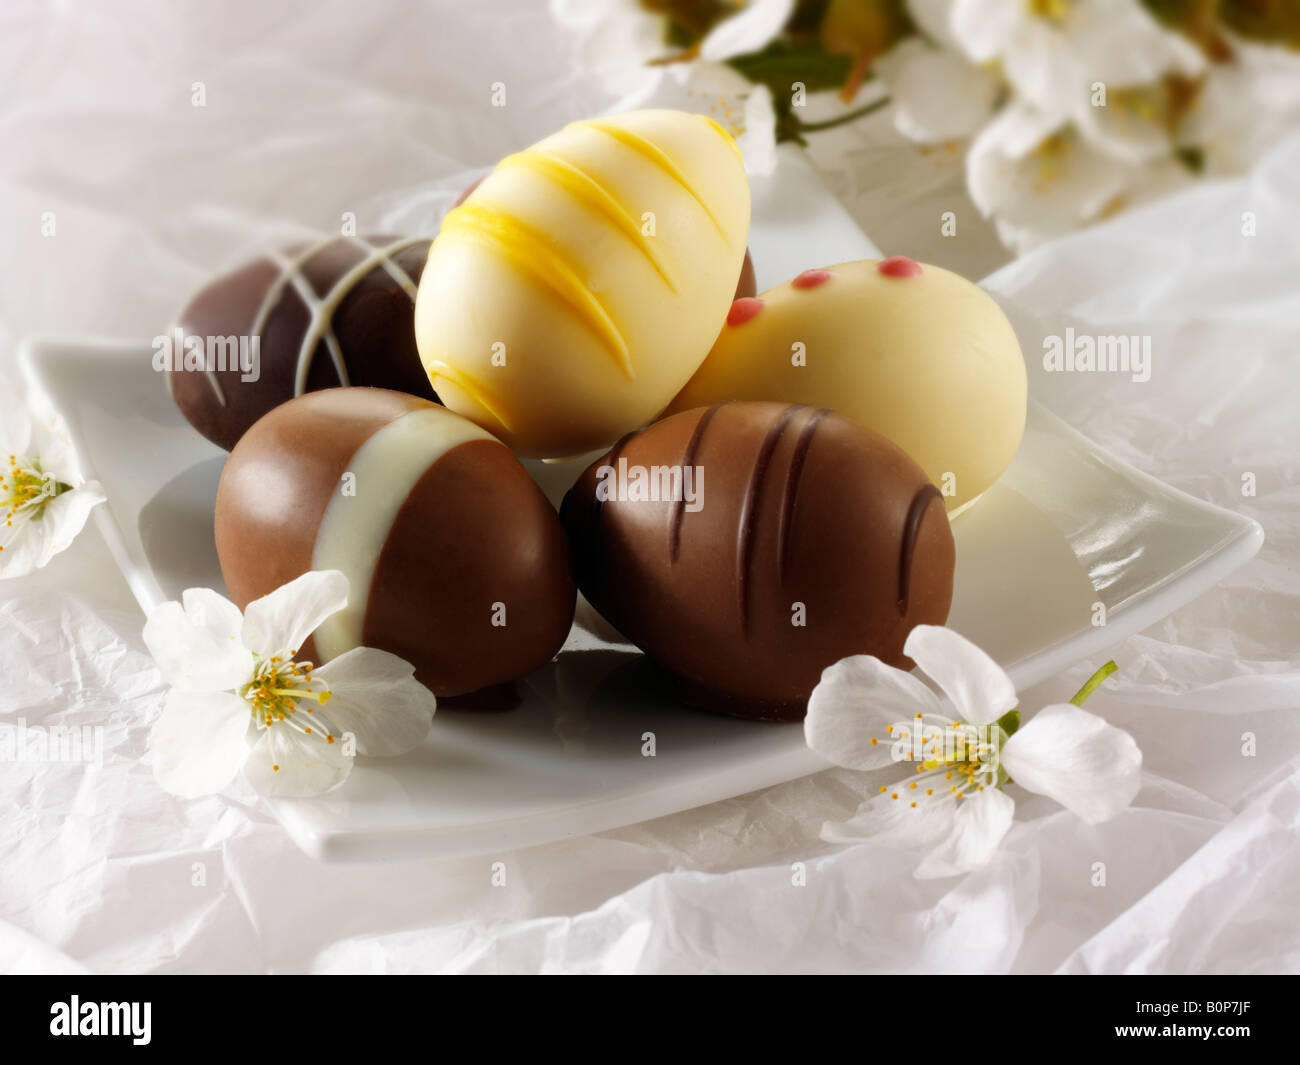 Studio food photo of Mini Chocolate decorated Easter eggs with cherry blossoms Stock Photo